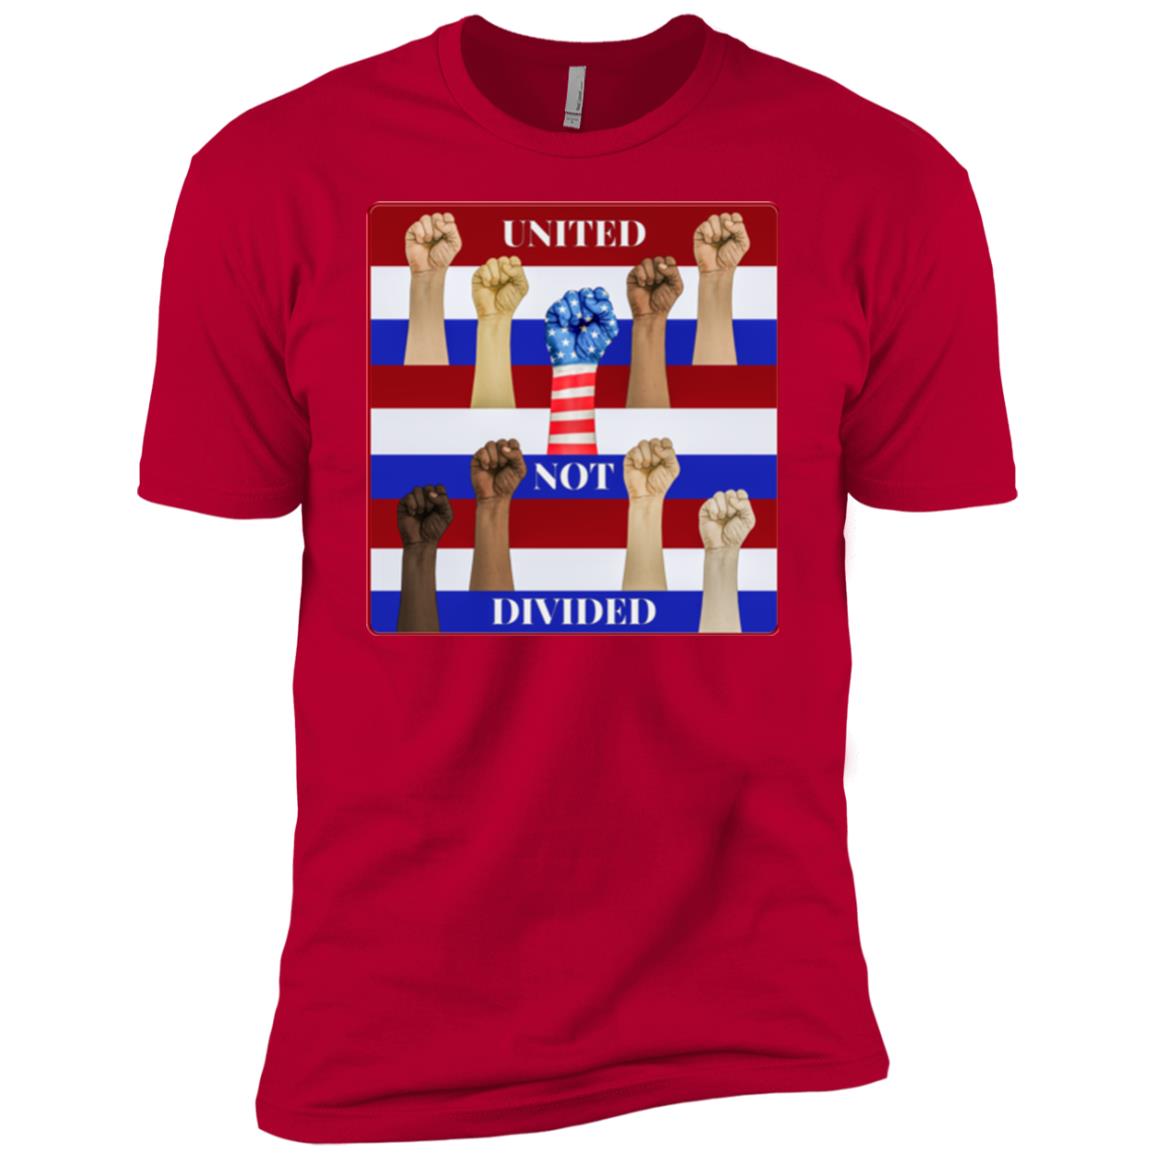 united not divided - Men's Premium Fitted T-Shirt